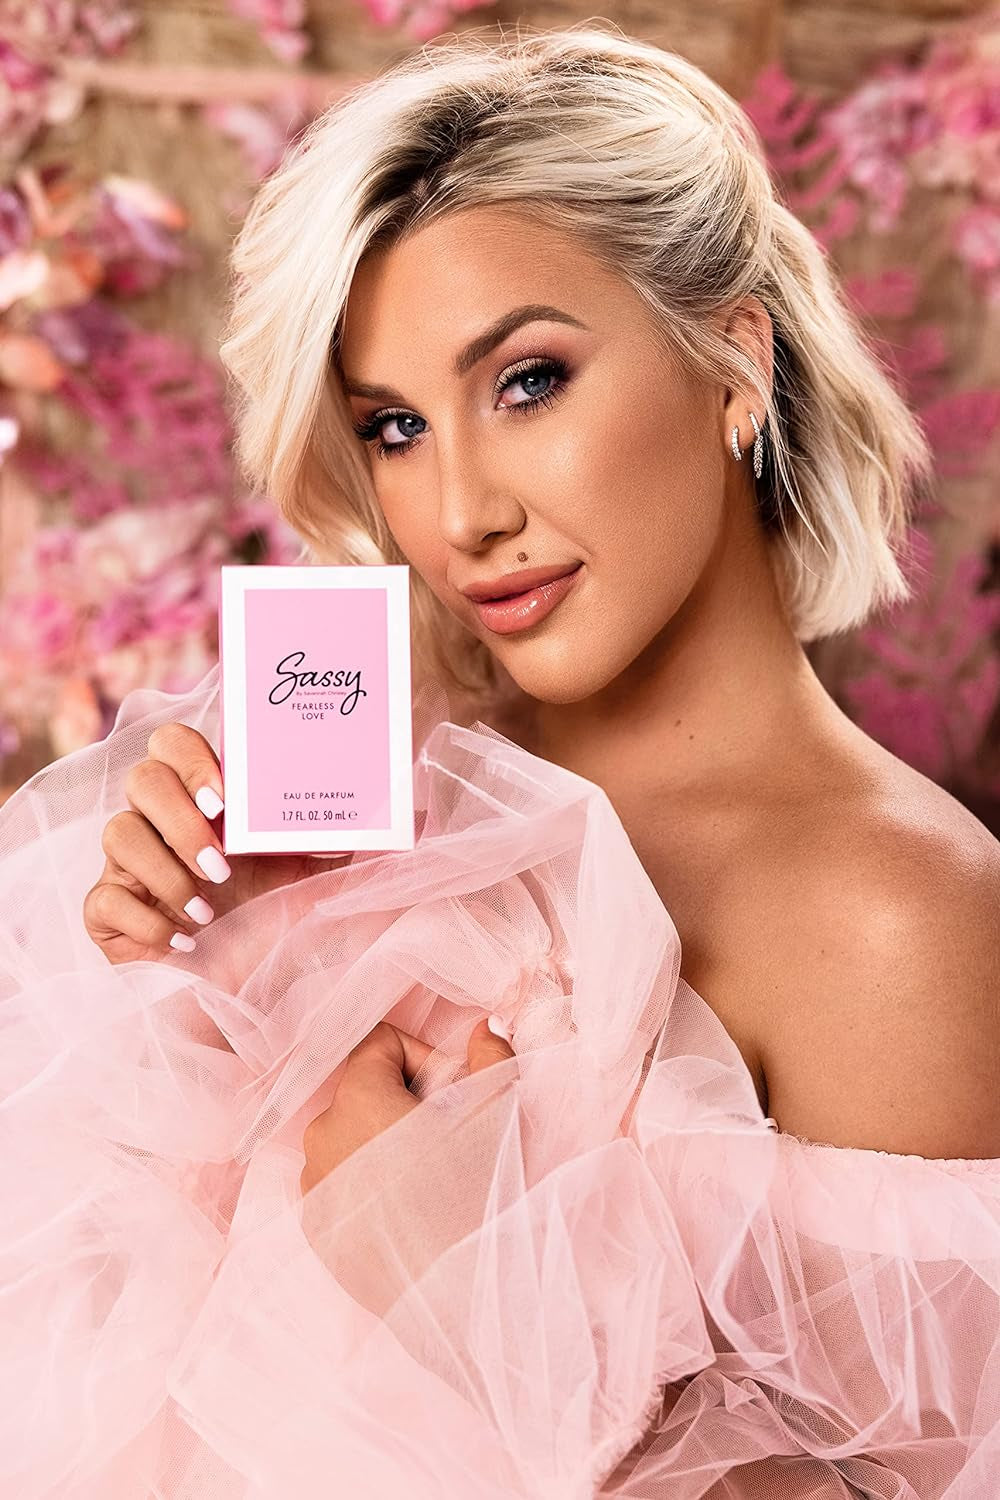 Sassy by Savannah Chrisley Fearless Love - Perfume for Women - Floral Woody Musk Fragrance - Opens with Notes of Litchi and Red Fruits - for Ladies with Endless Affection - 1.7 oz EDP Spray